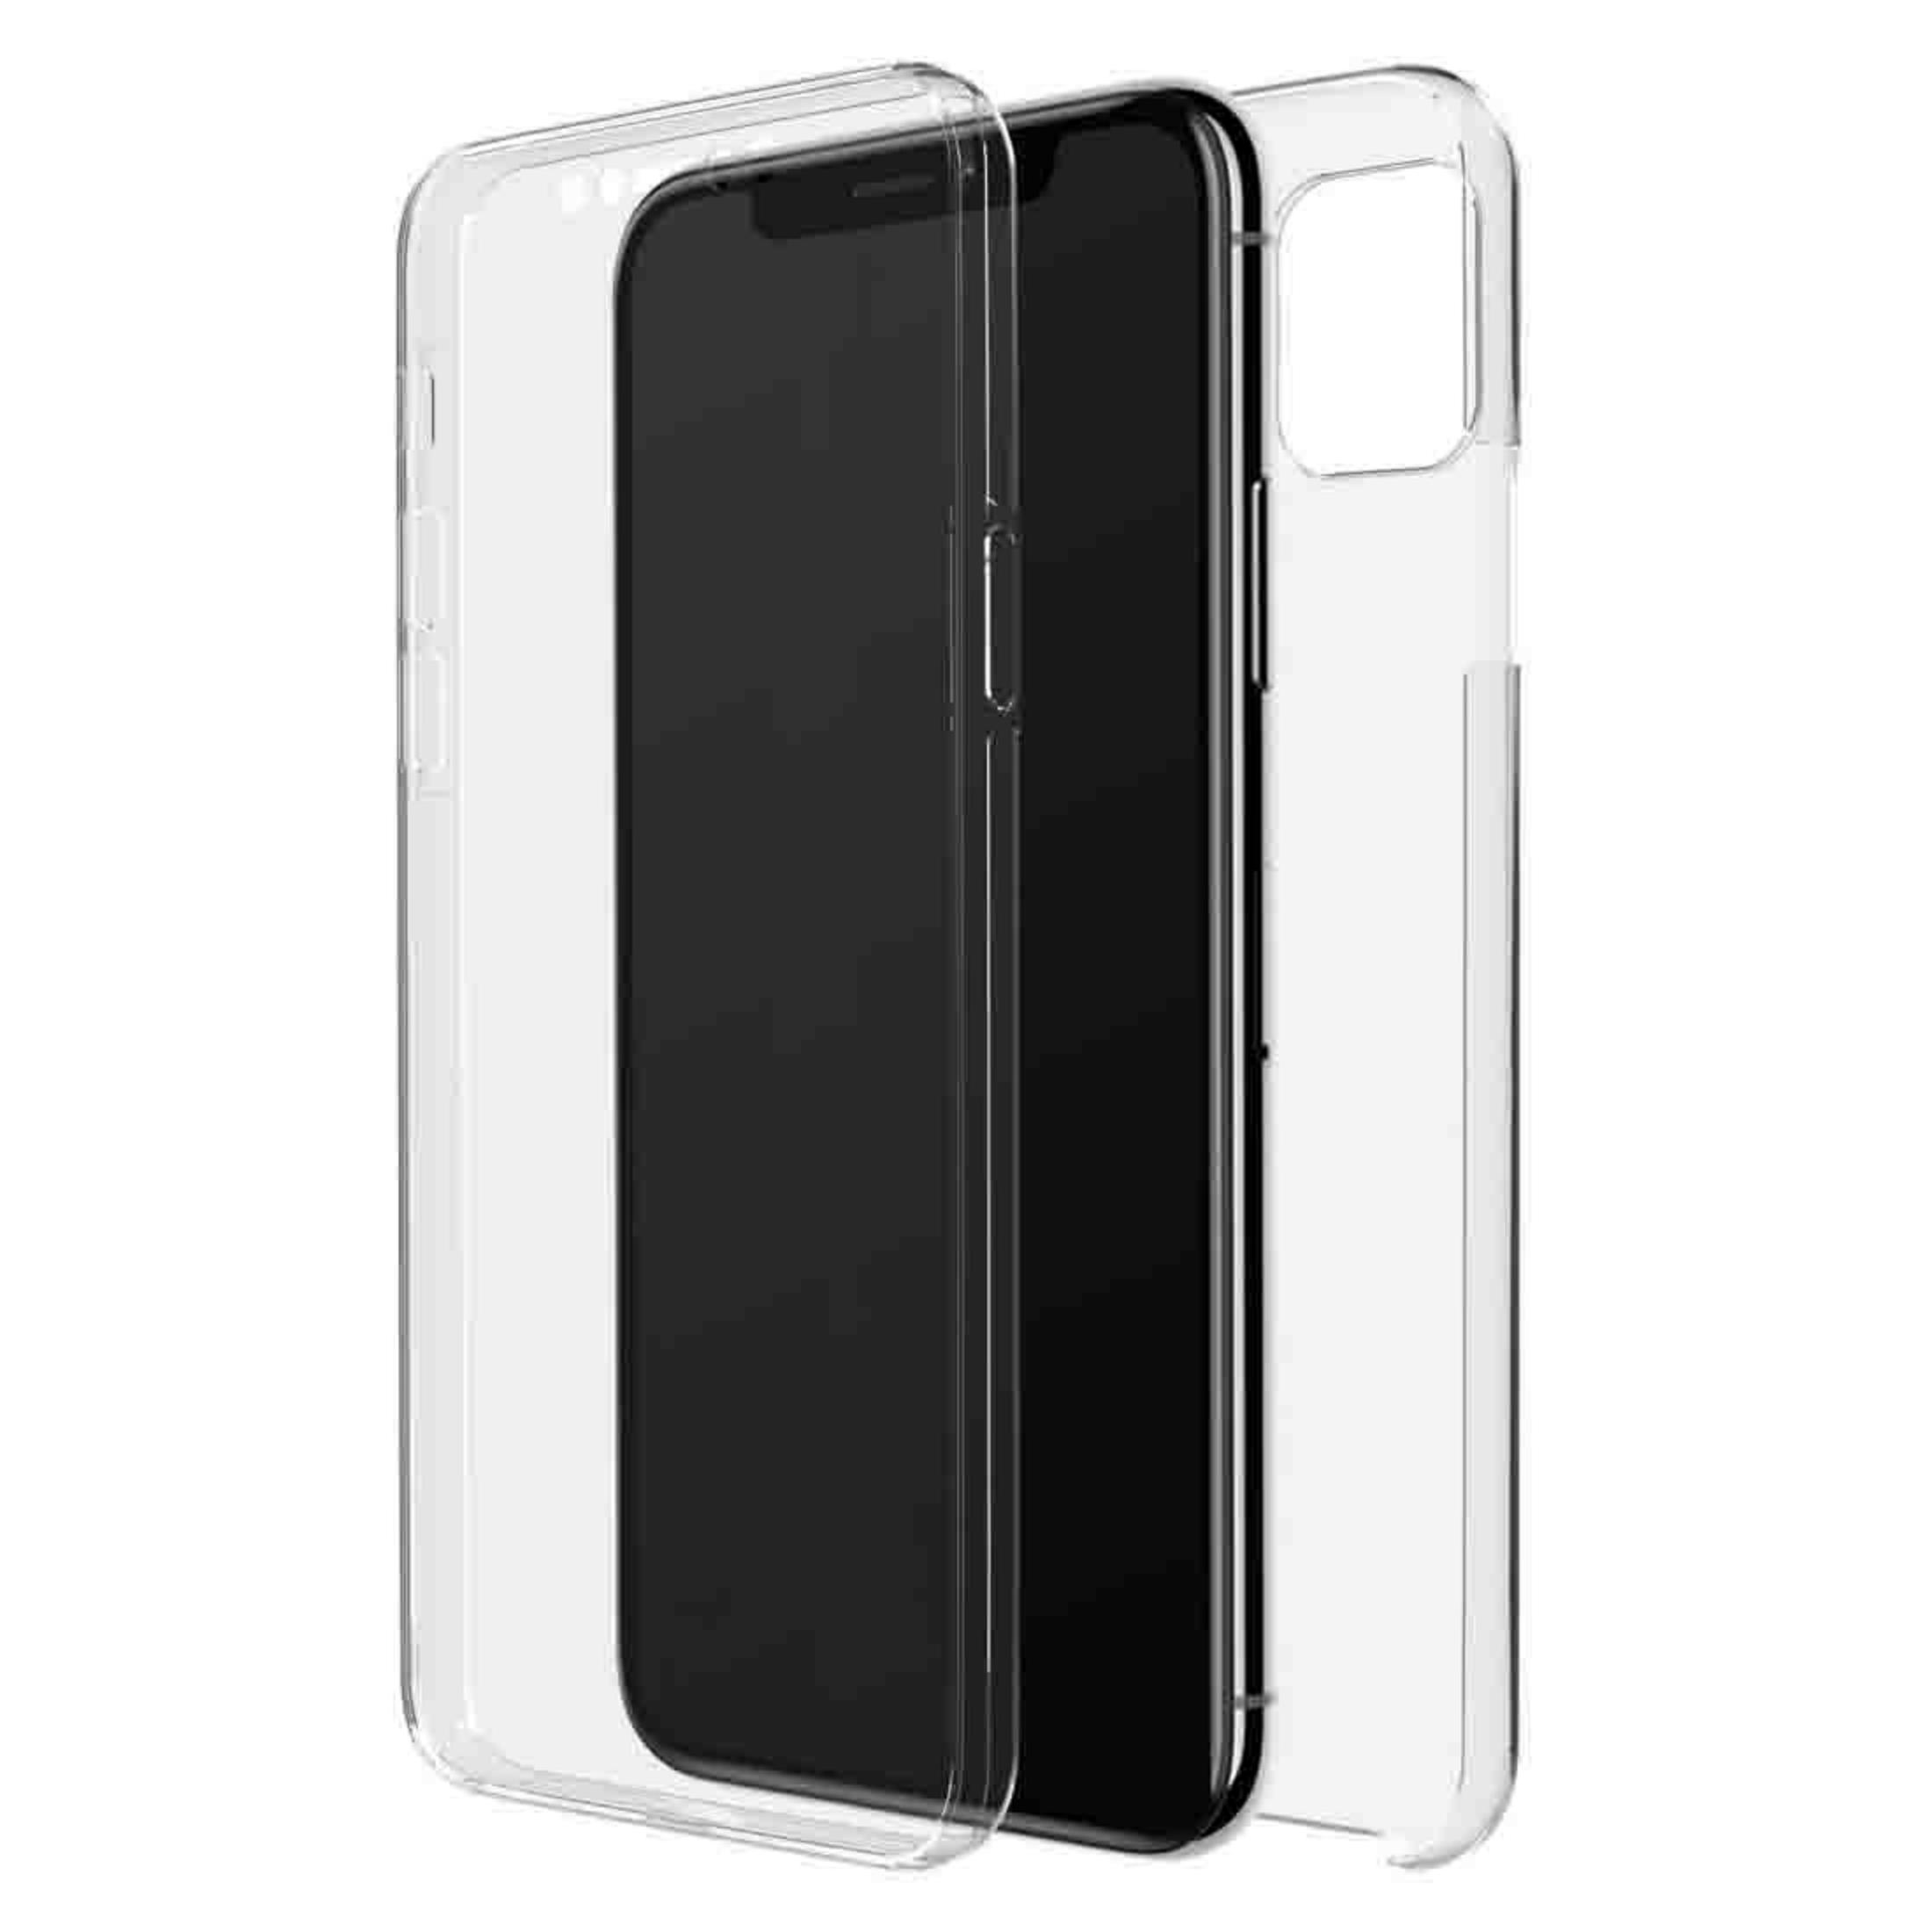 BLACK ROCK 187025 11 11 Cover, IPHONE CLEAR Transparent CO iPhone Apple, PRO, Full Max, 360° Pro